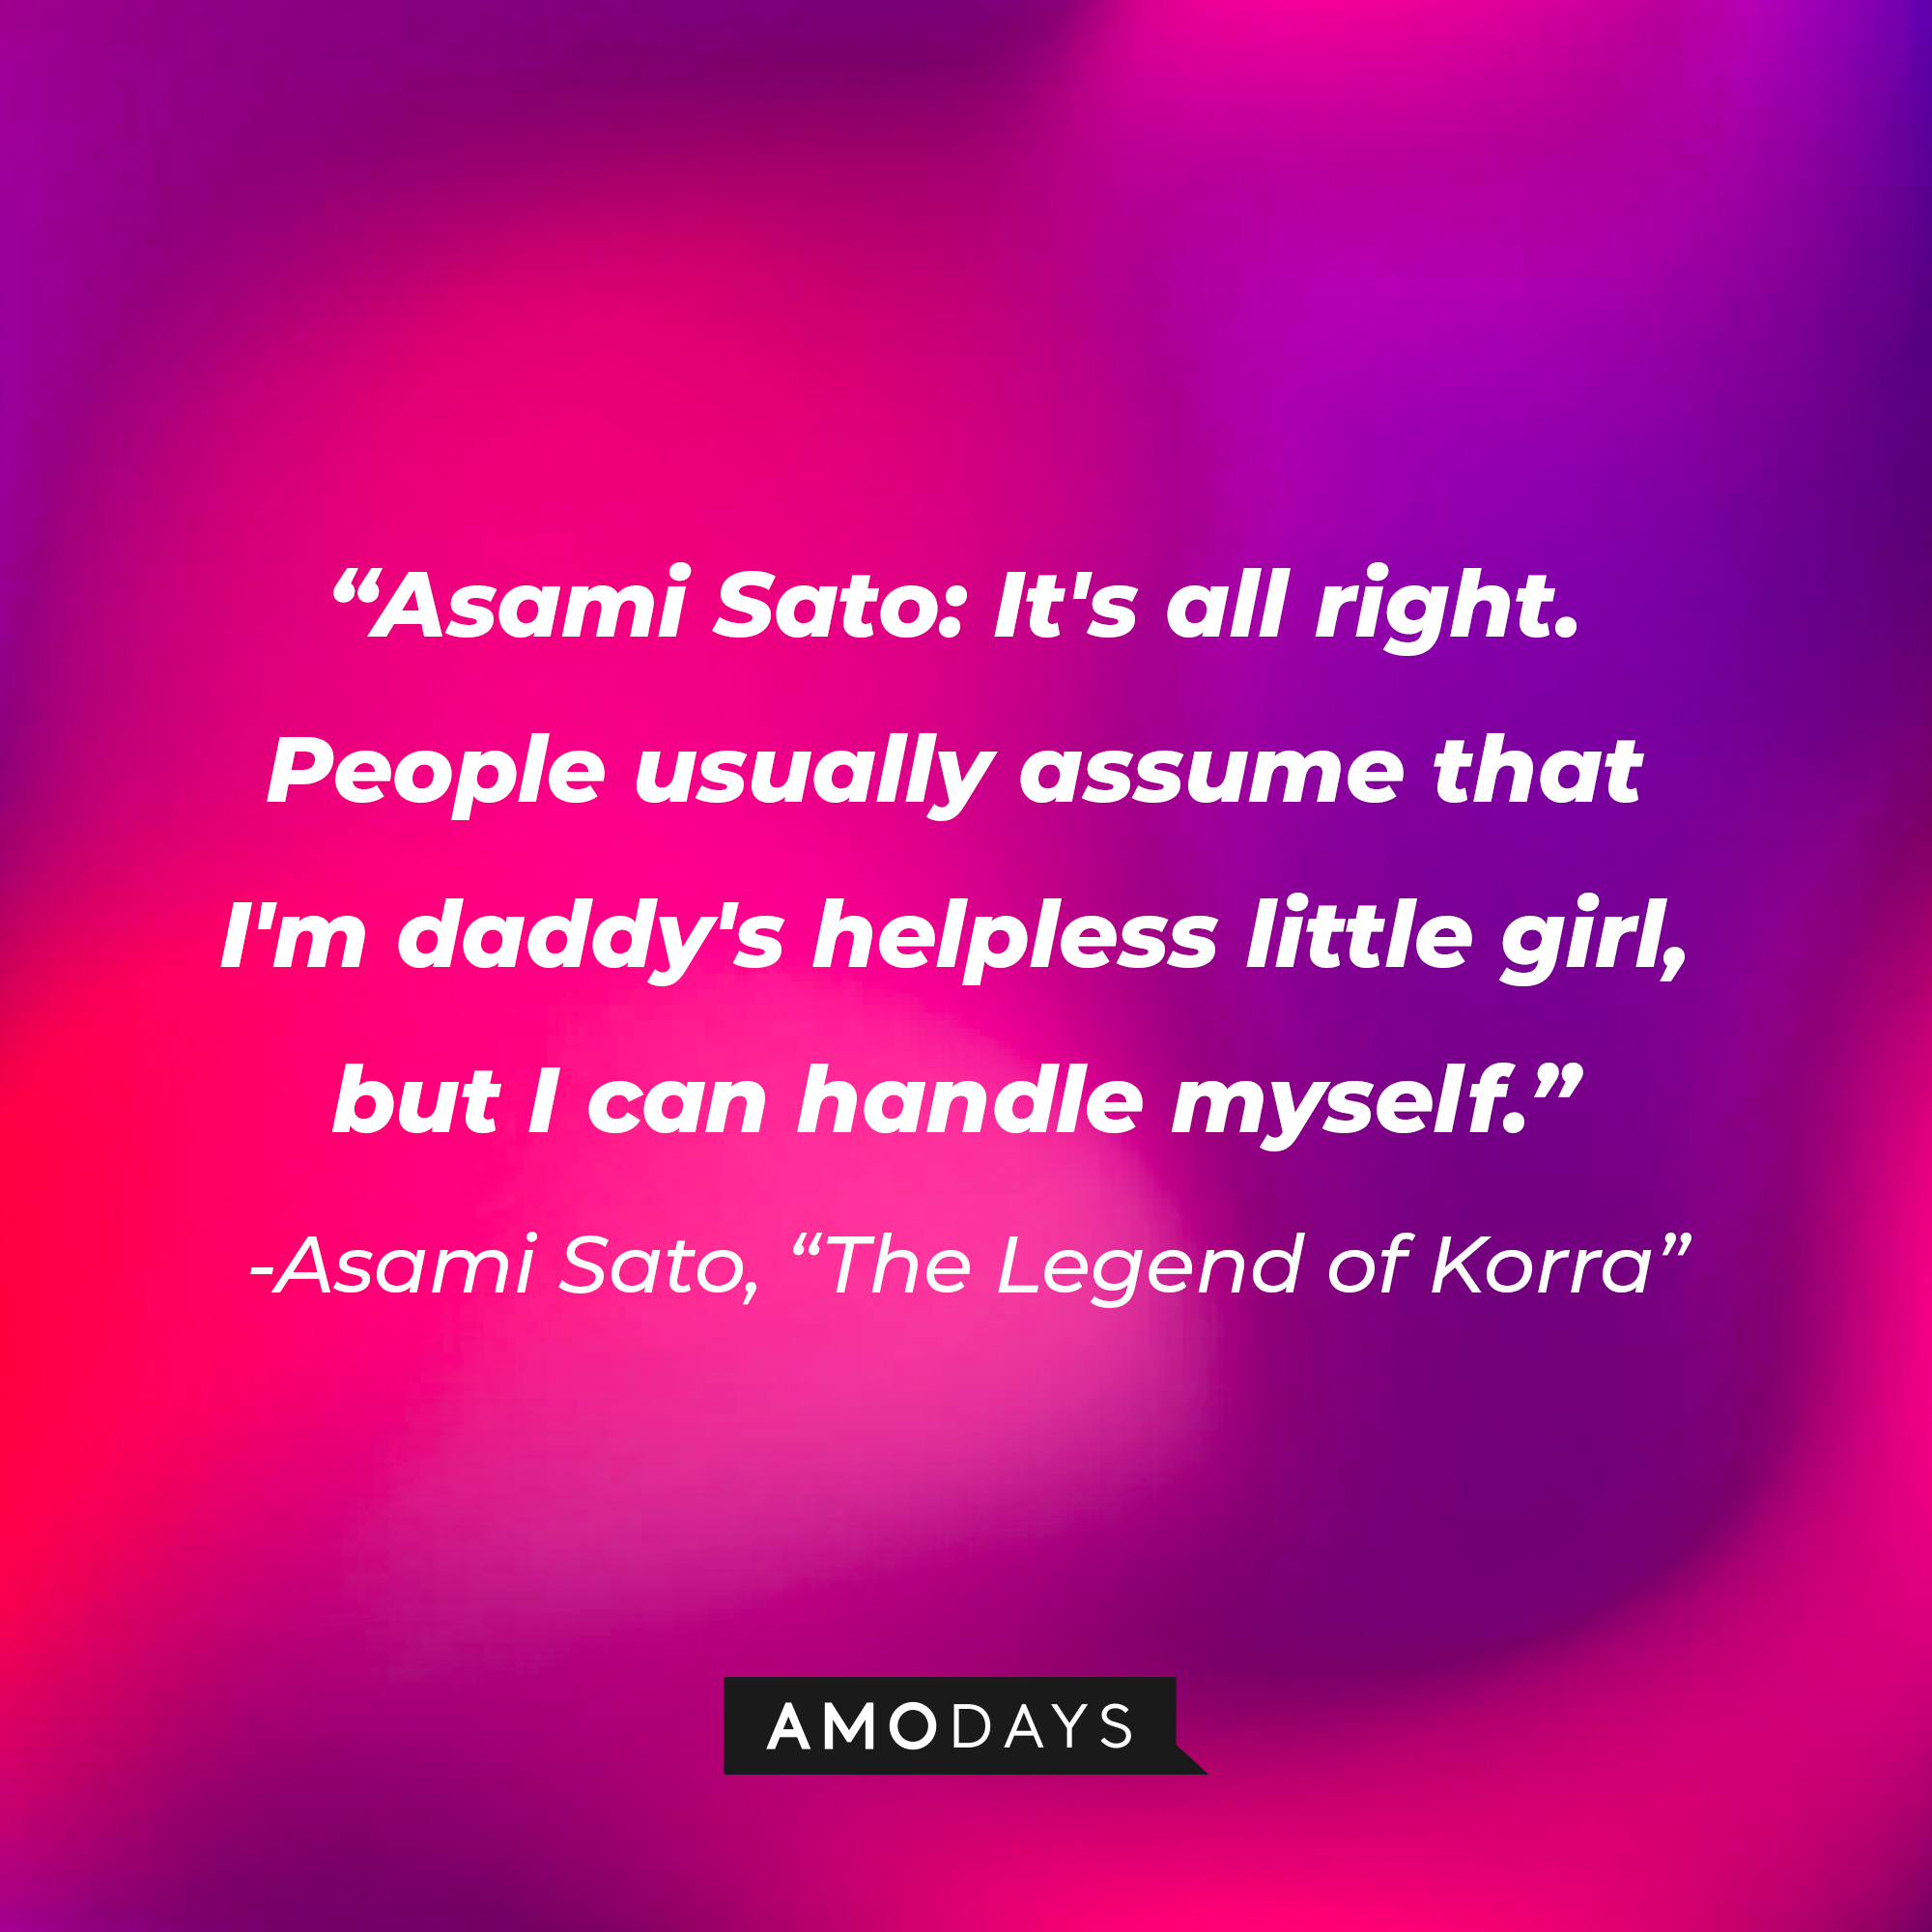 Asami Sato’s quote in “Avatar: The Legend of Korra:” “It's all right. People usually assume that I'm daddy's helpless little girl, but I can handle myself." | Source: Amodays